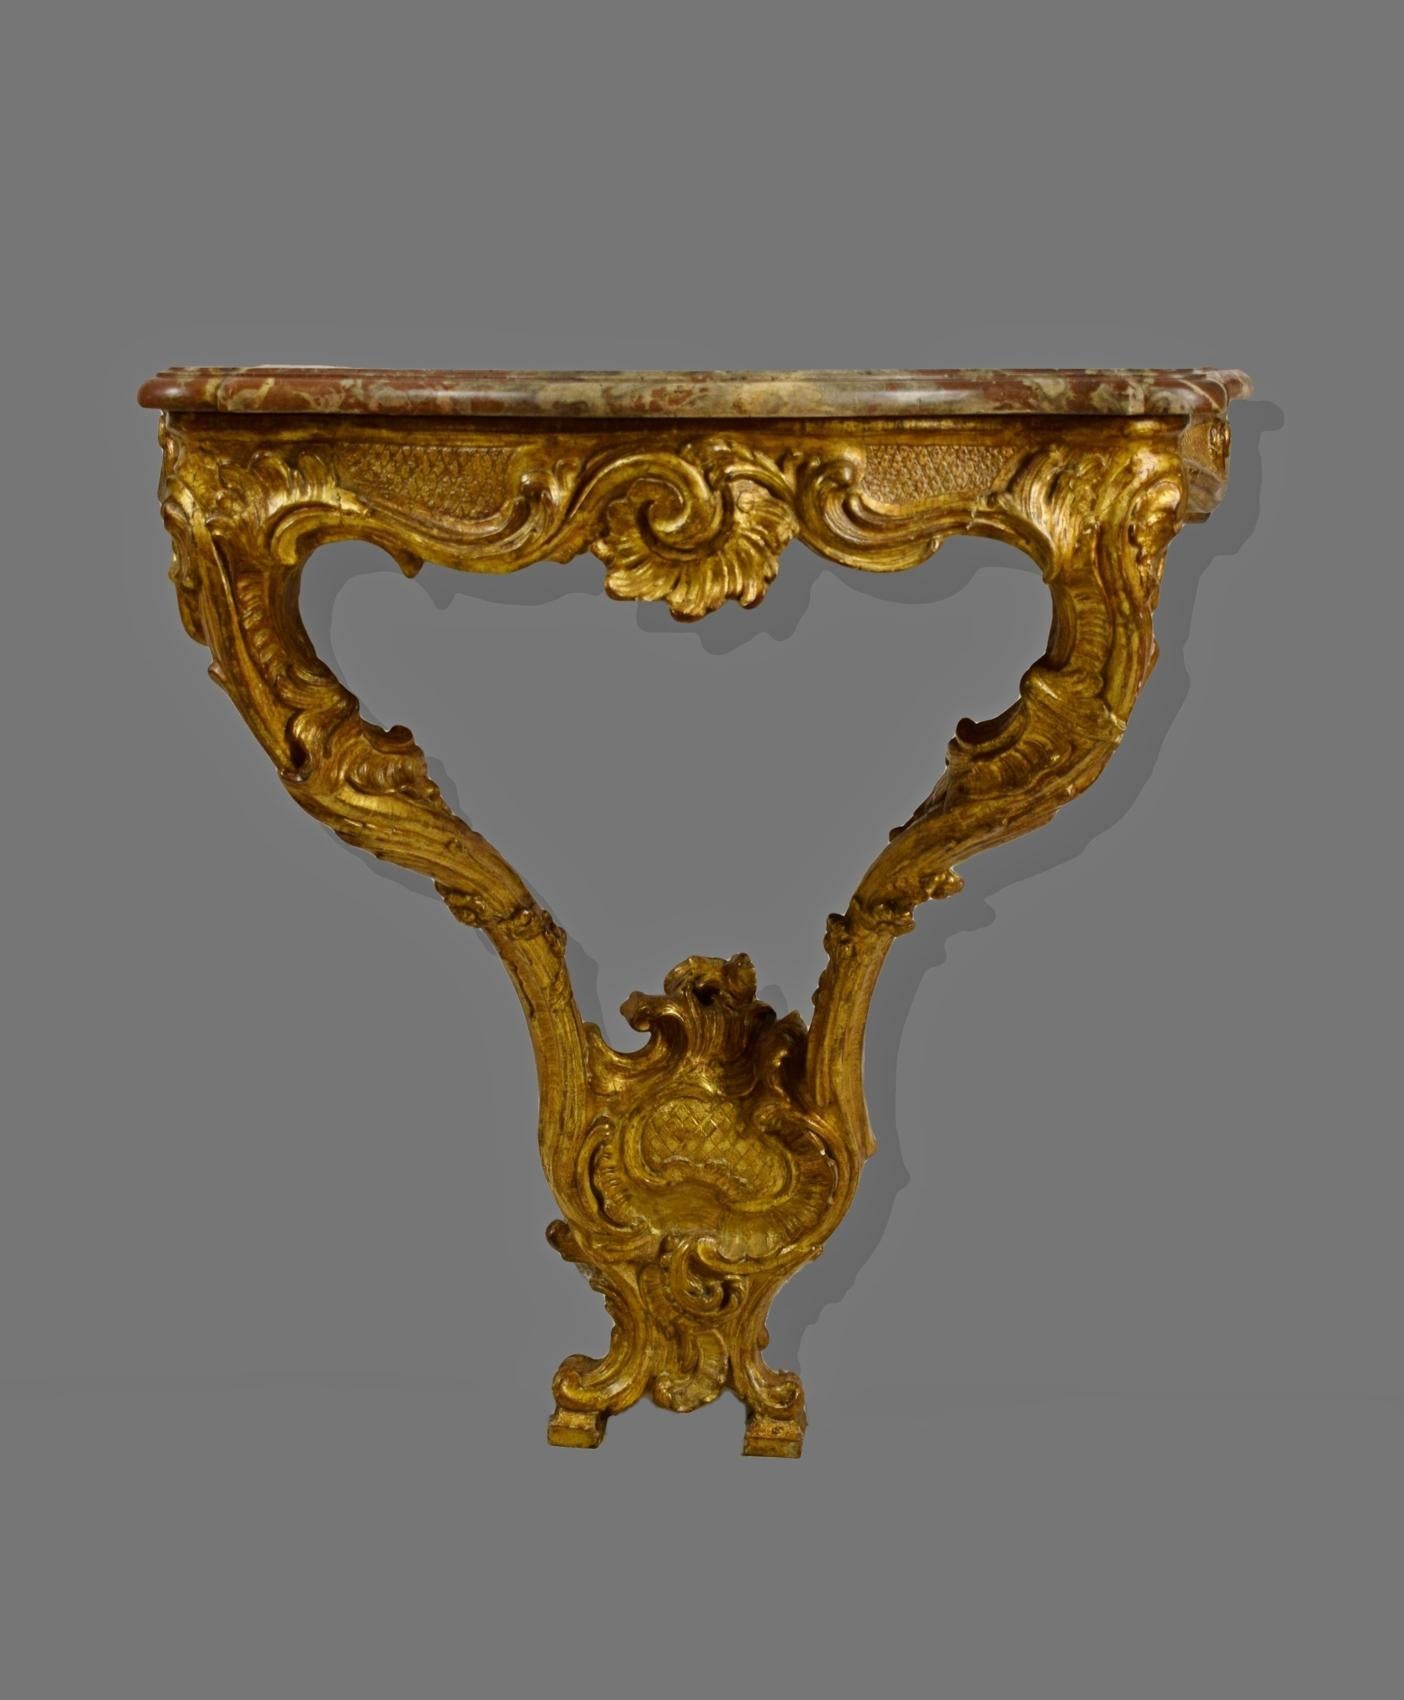 18th French Louis XV giltwood teardrop table console

This small console d'applique, was made in France in the 18th century, Louis XV. The richly carved and gilded wooden structure, in a wavy line, has a refined 'teardrop' shape, consisting of two